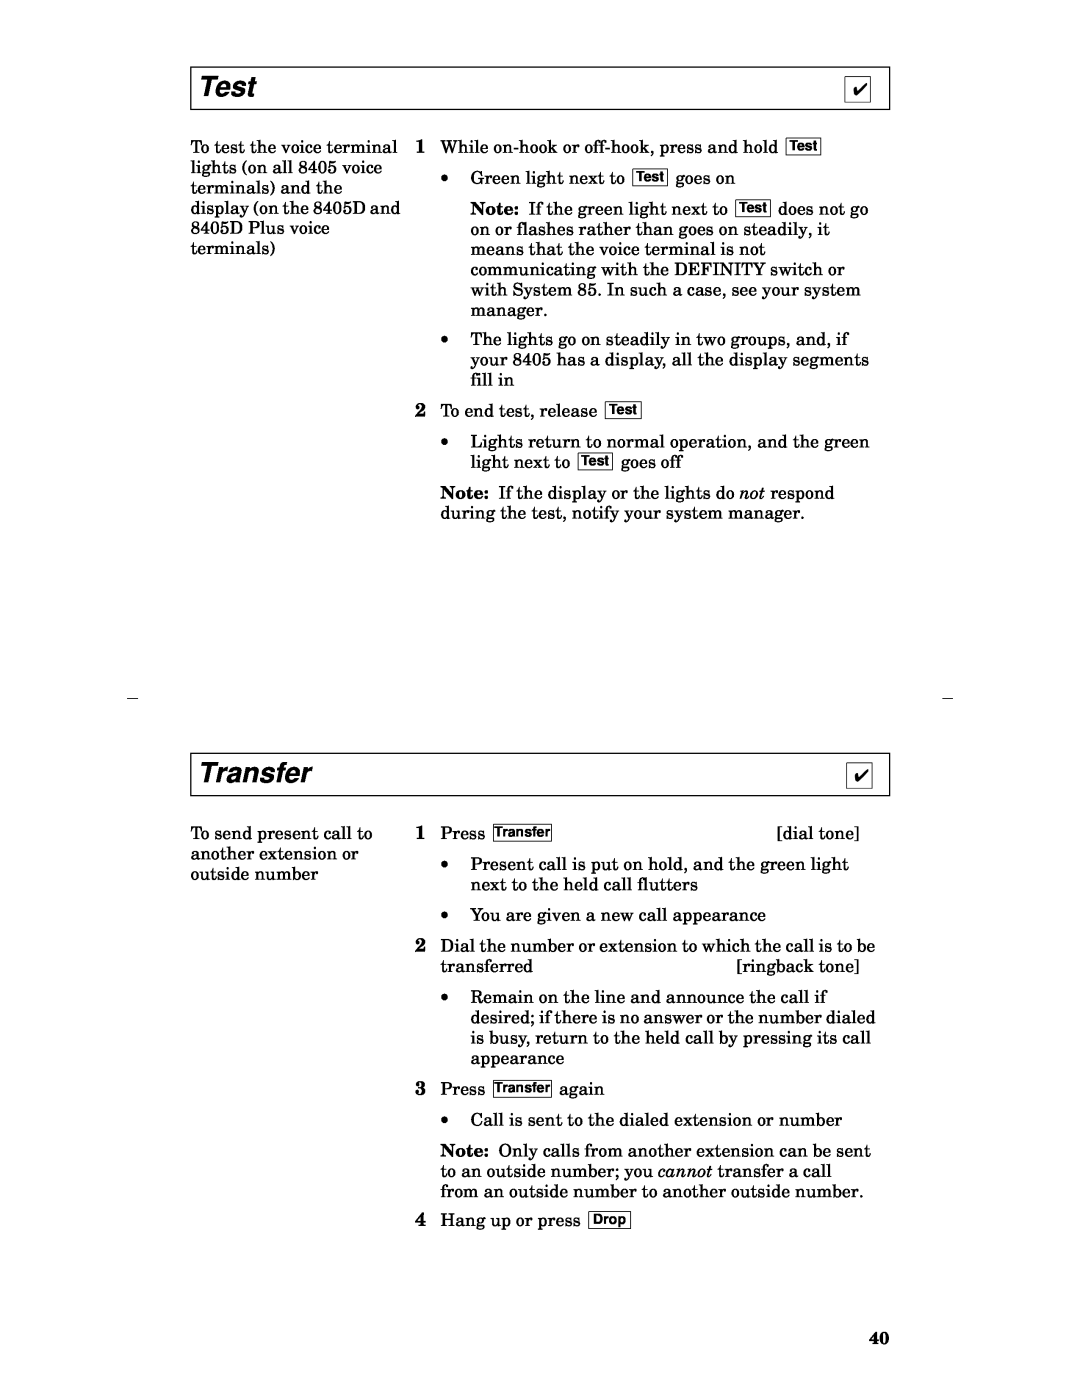 Lucent Technologies 8405 manual Test, Transfer 